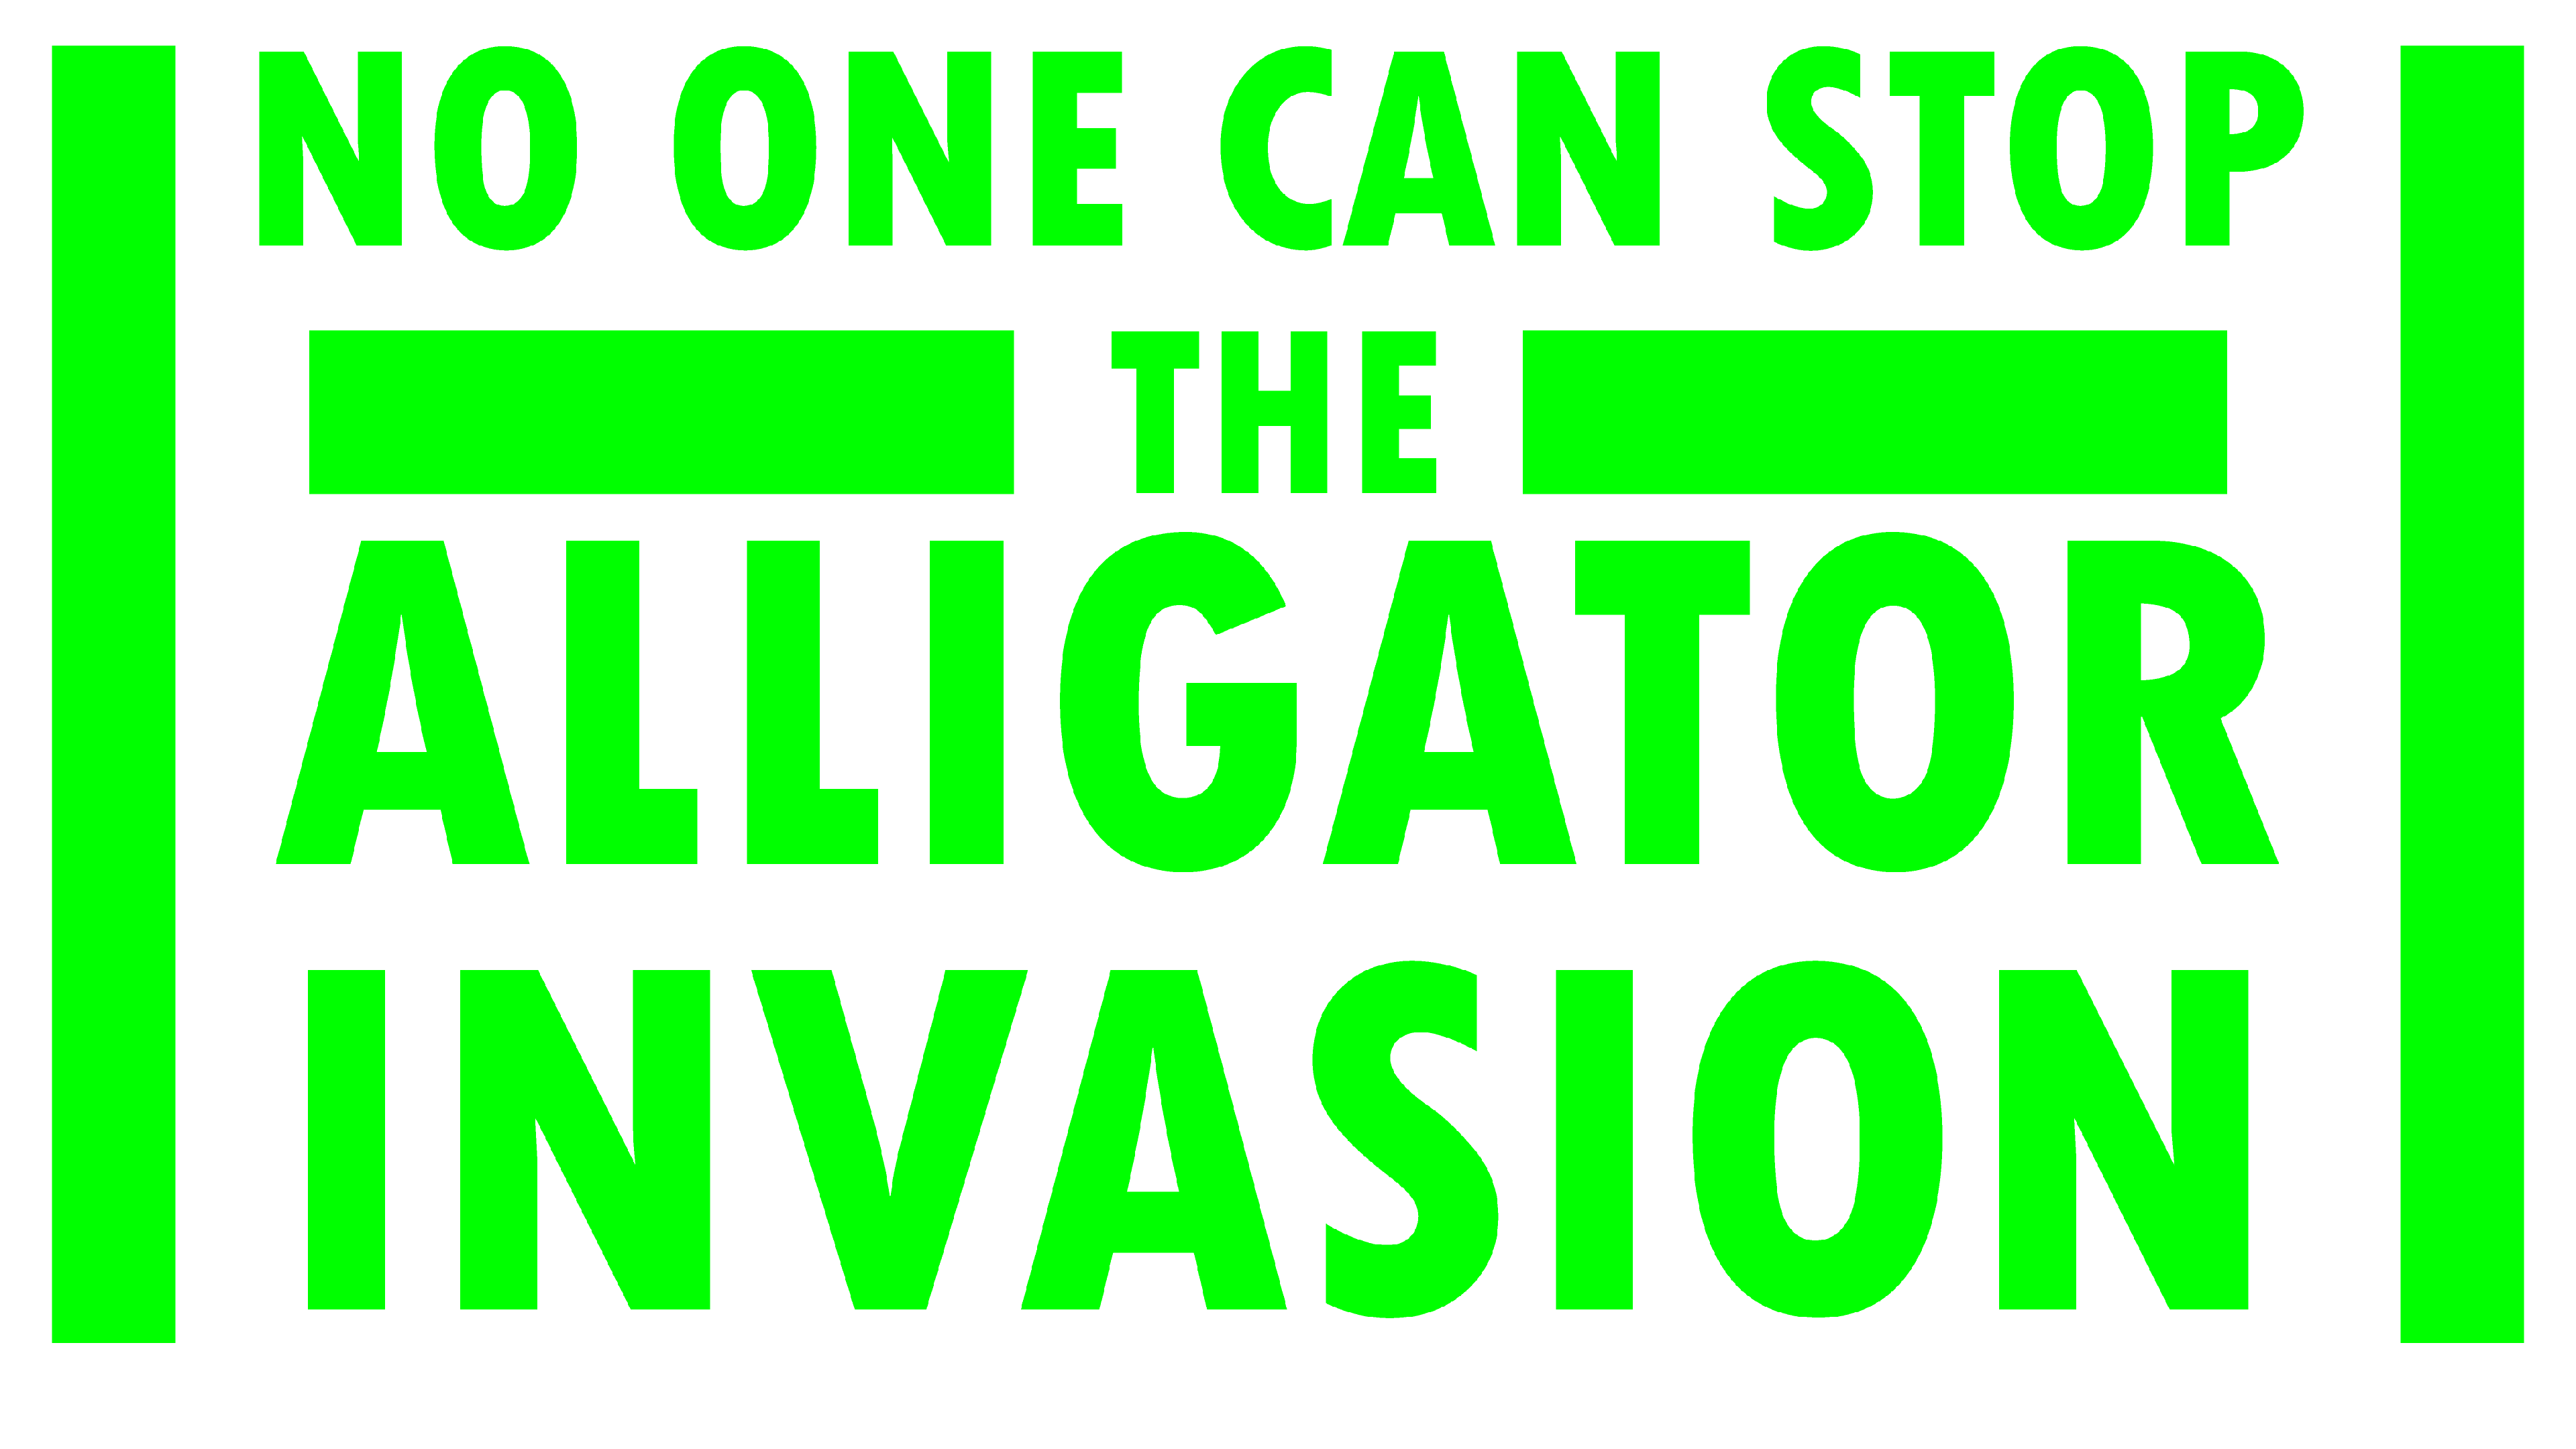 NO ONE CAN STOP THE ALLIGATOR INVASION